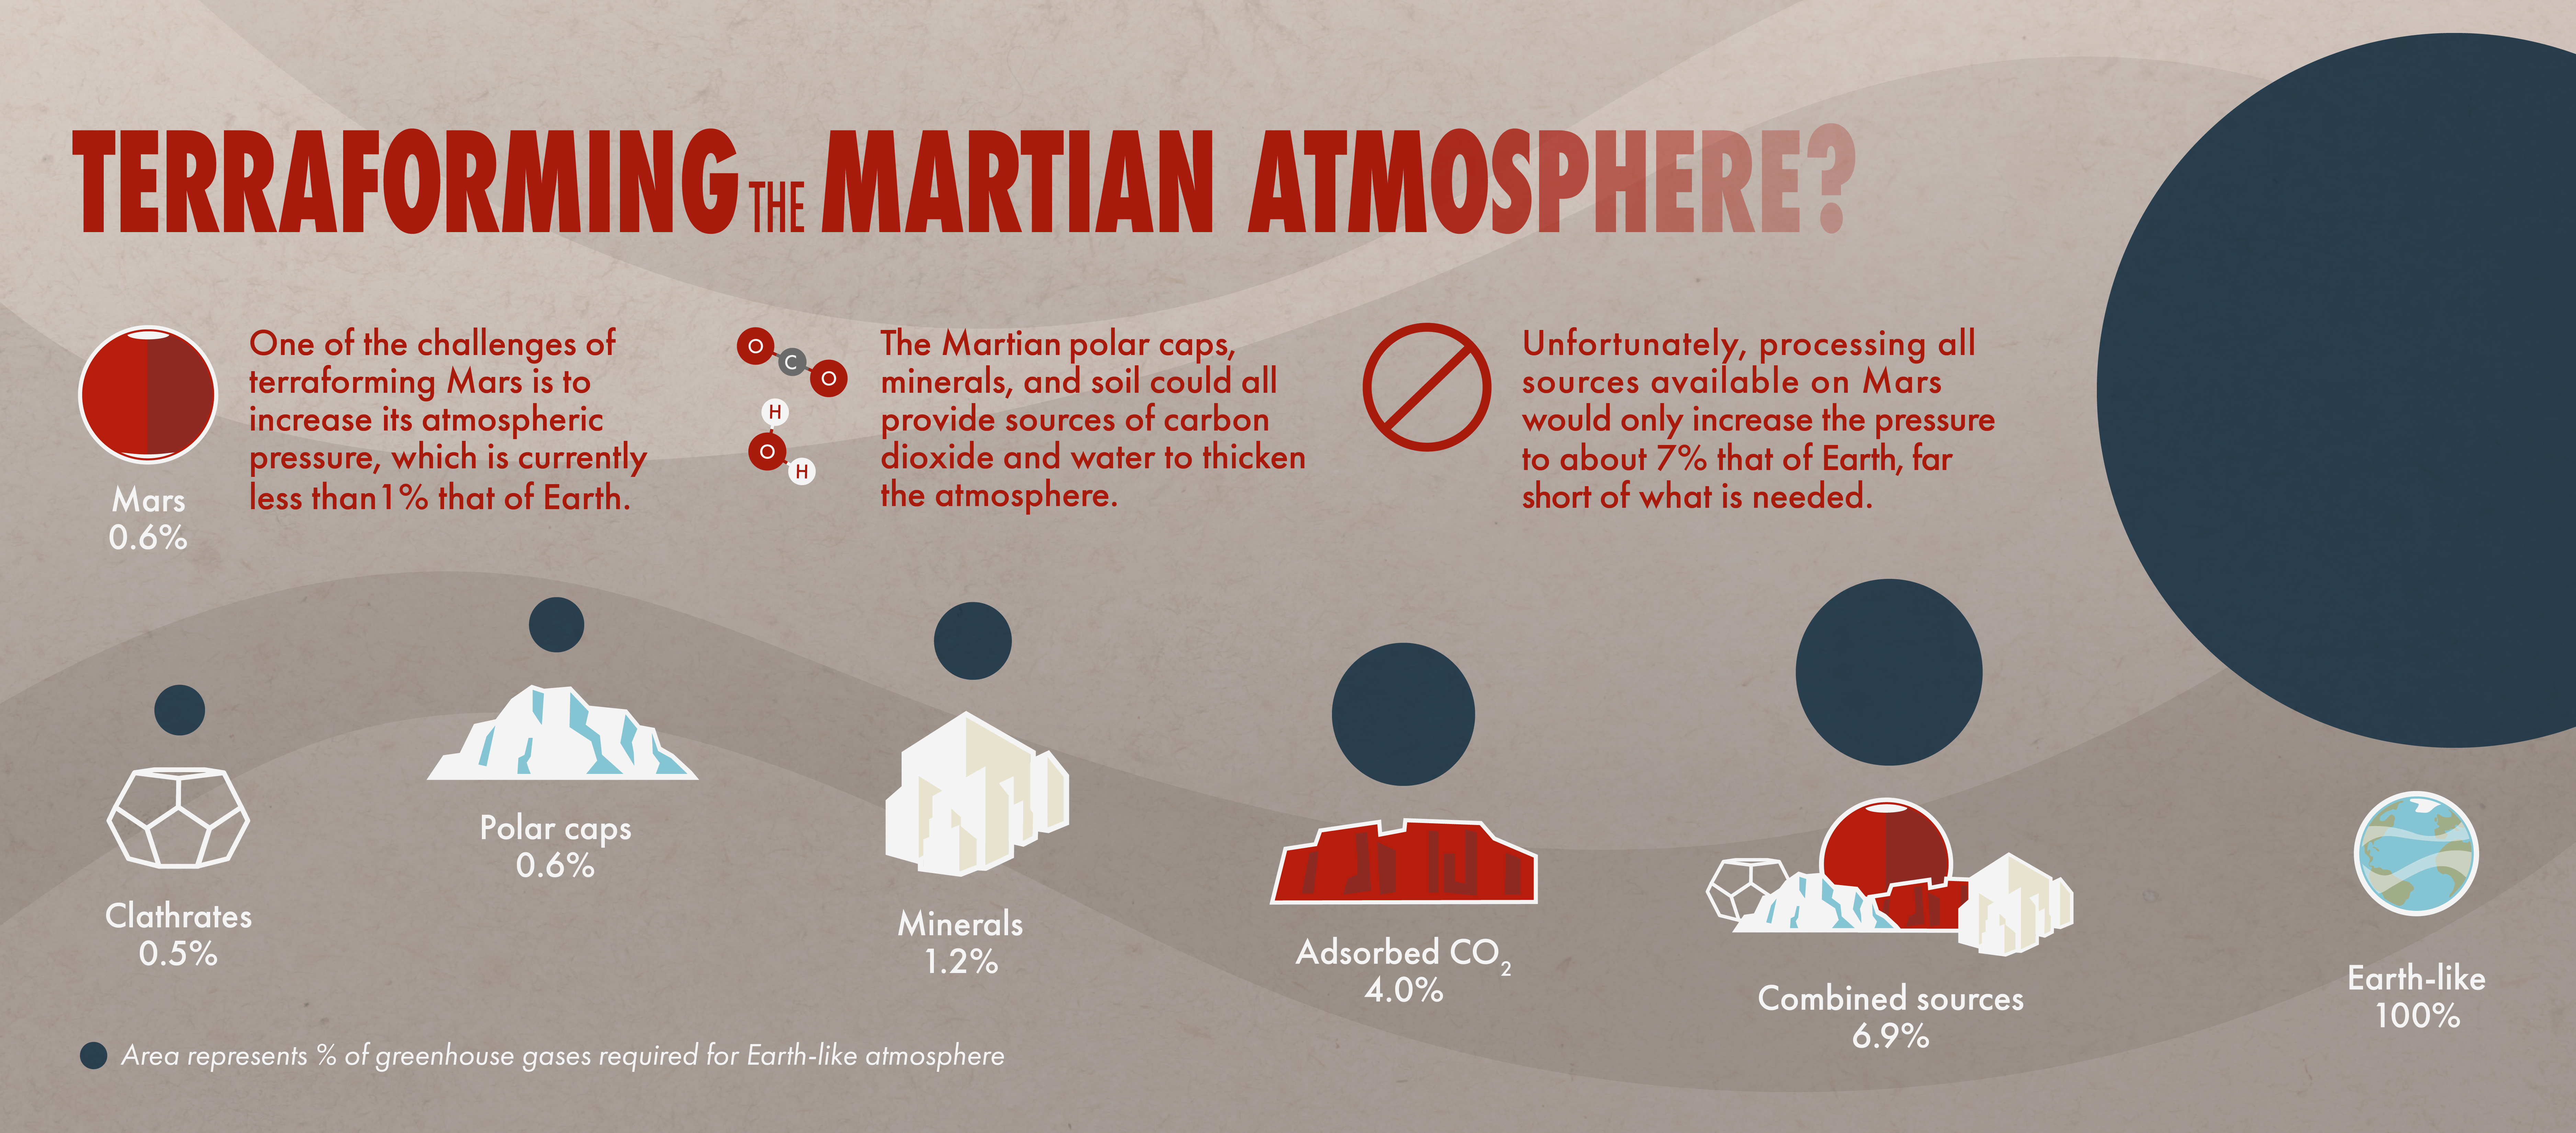 Is Terraforming Mars Ethical? - The Debrief